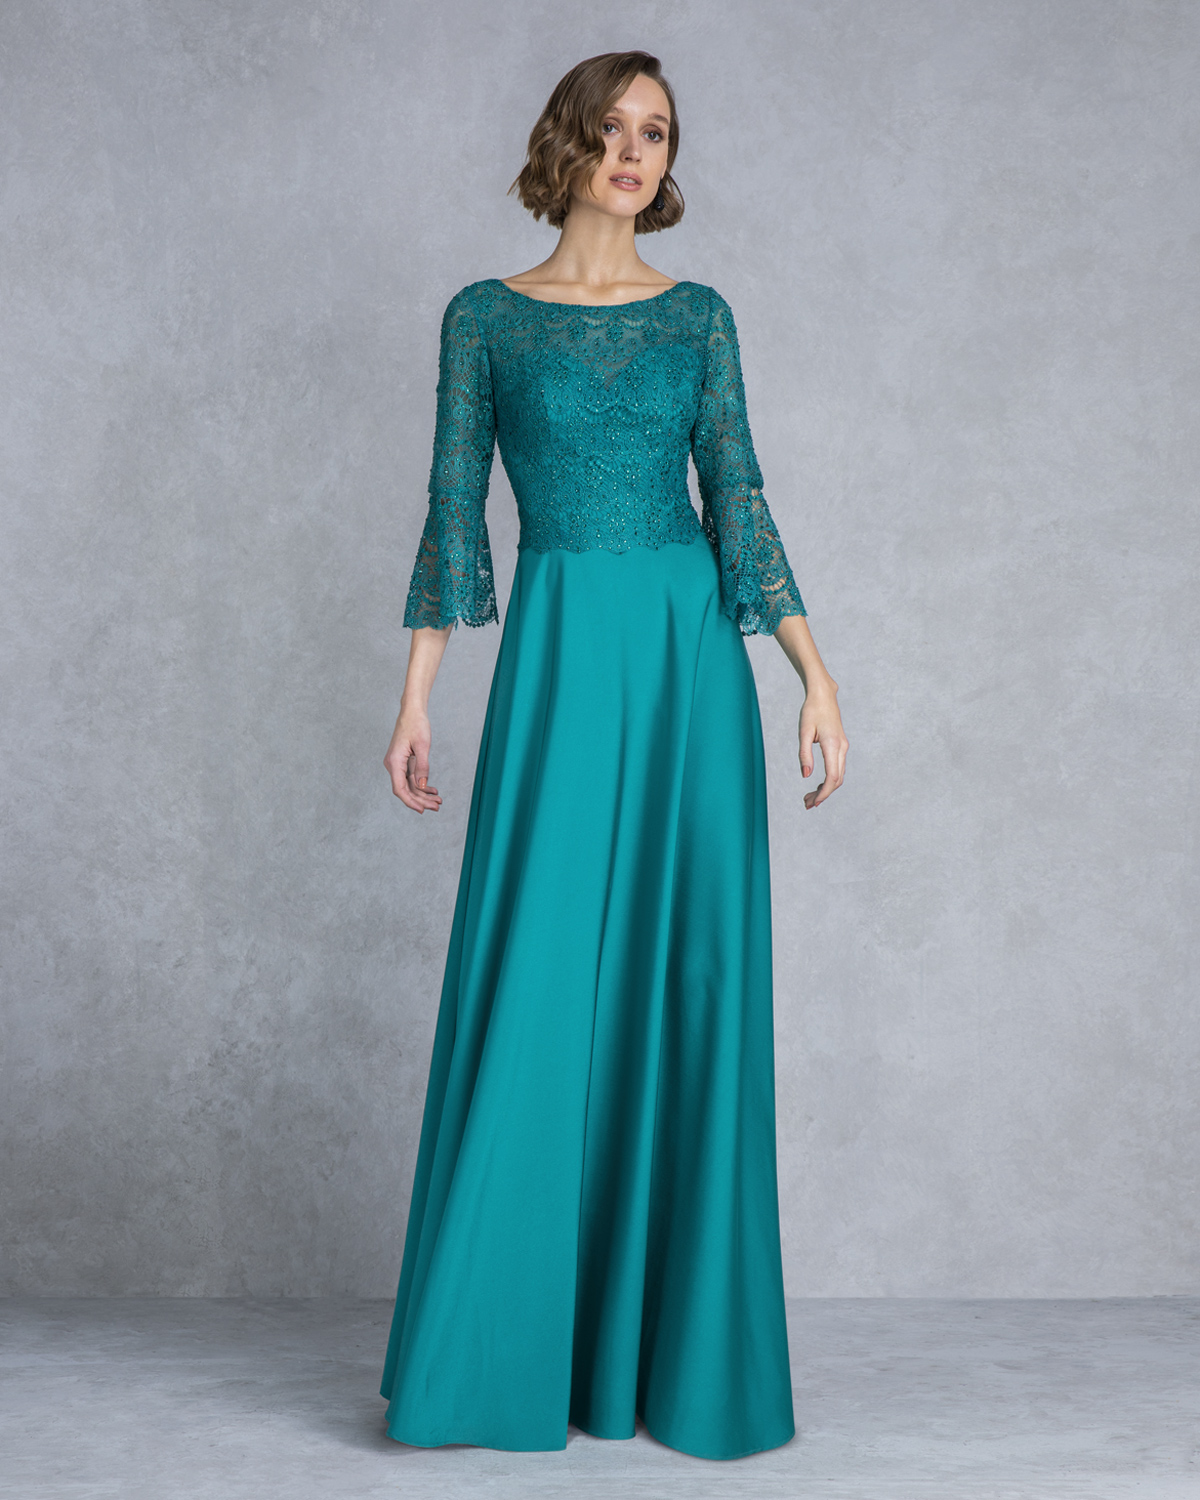 Classic Dresses / Long evening dress with lace top and sleeves